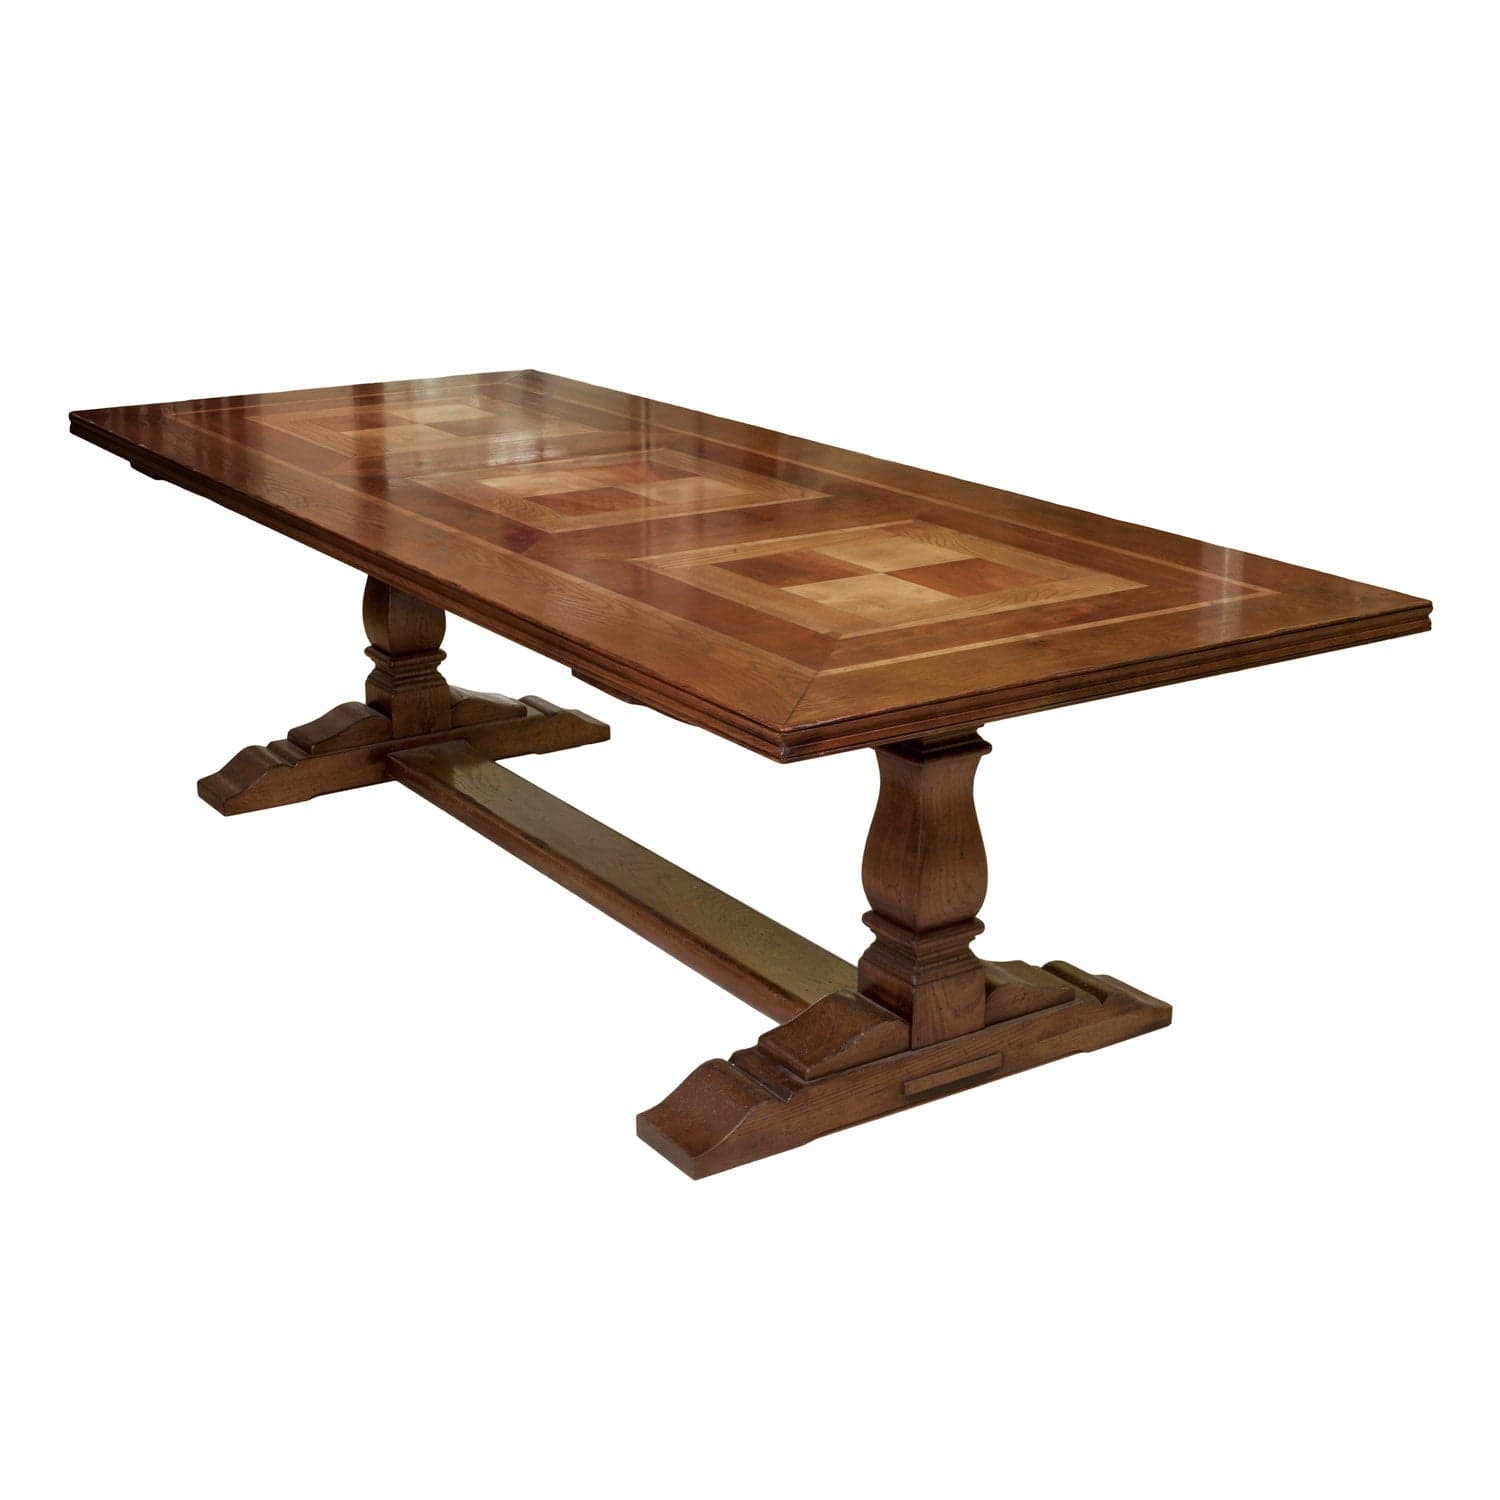 Gaudion Furniture Dining Table Pedestal Dining Table Custom Made